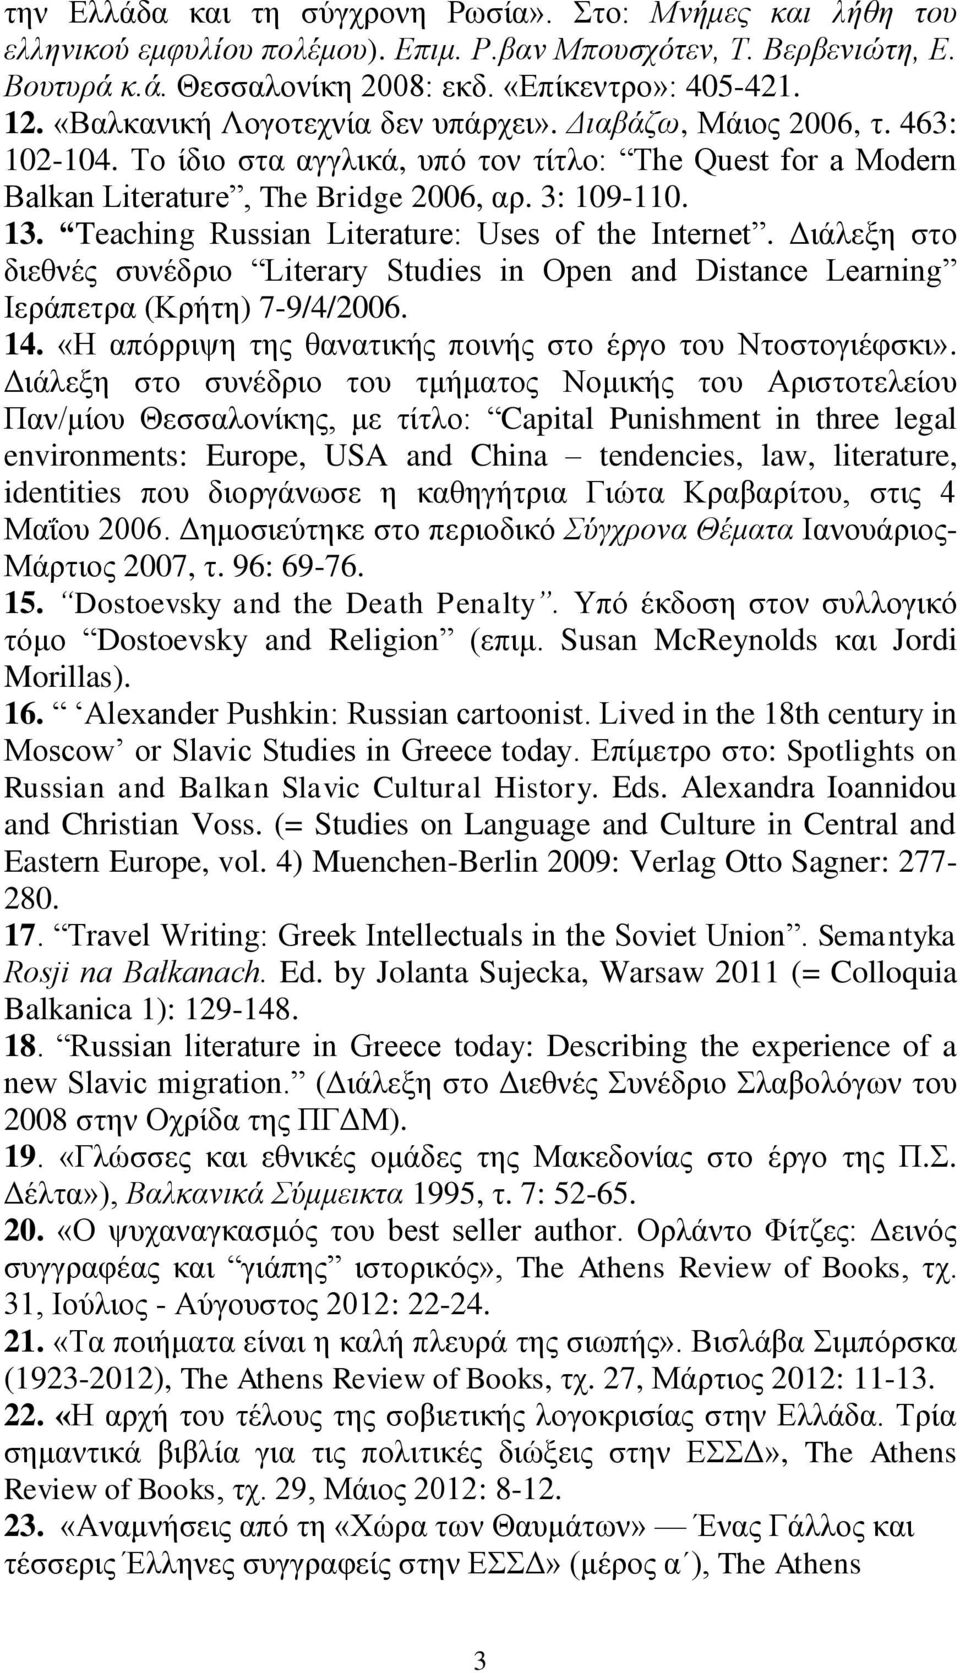 Teaching Russian Literature: Uses of the Internet. Διάλεξη στο διεθνές συνέδριο Literary Studies in Open and Distance Learning Ιεράπετρα (Κρήτη) 7-9/4/2006. 14.